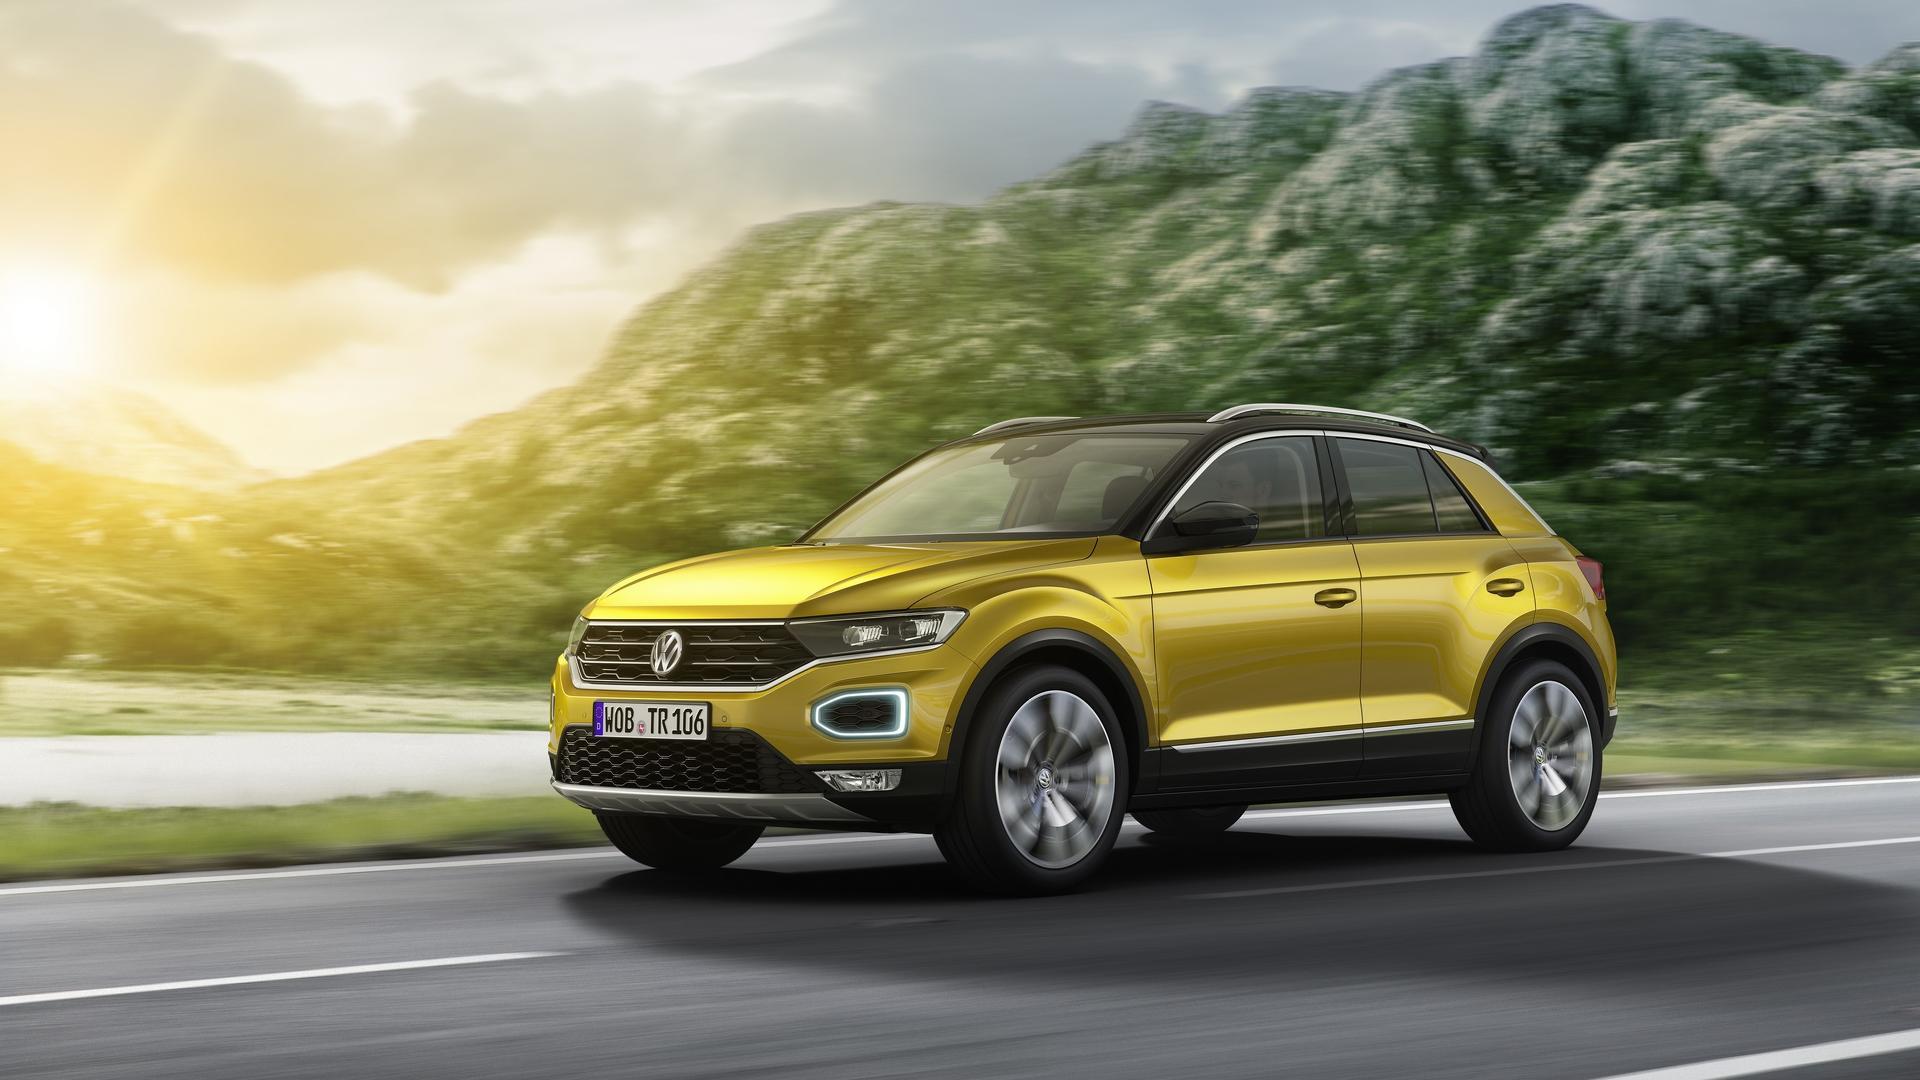 Volkswagen brand's first SUV cabriolet: Supervisory Board confirms